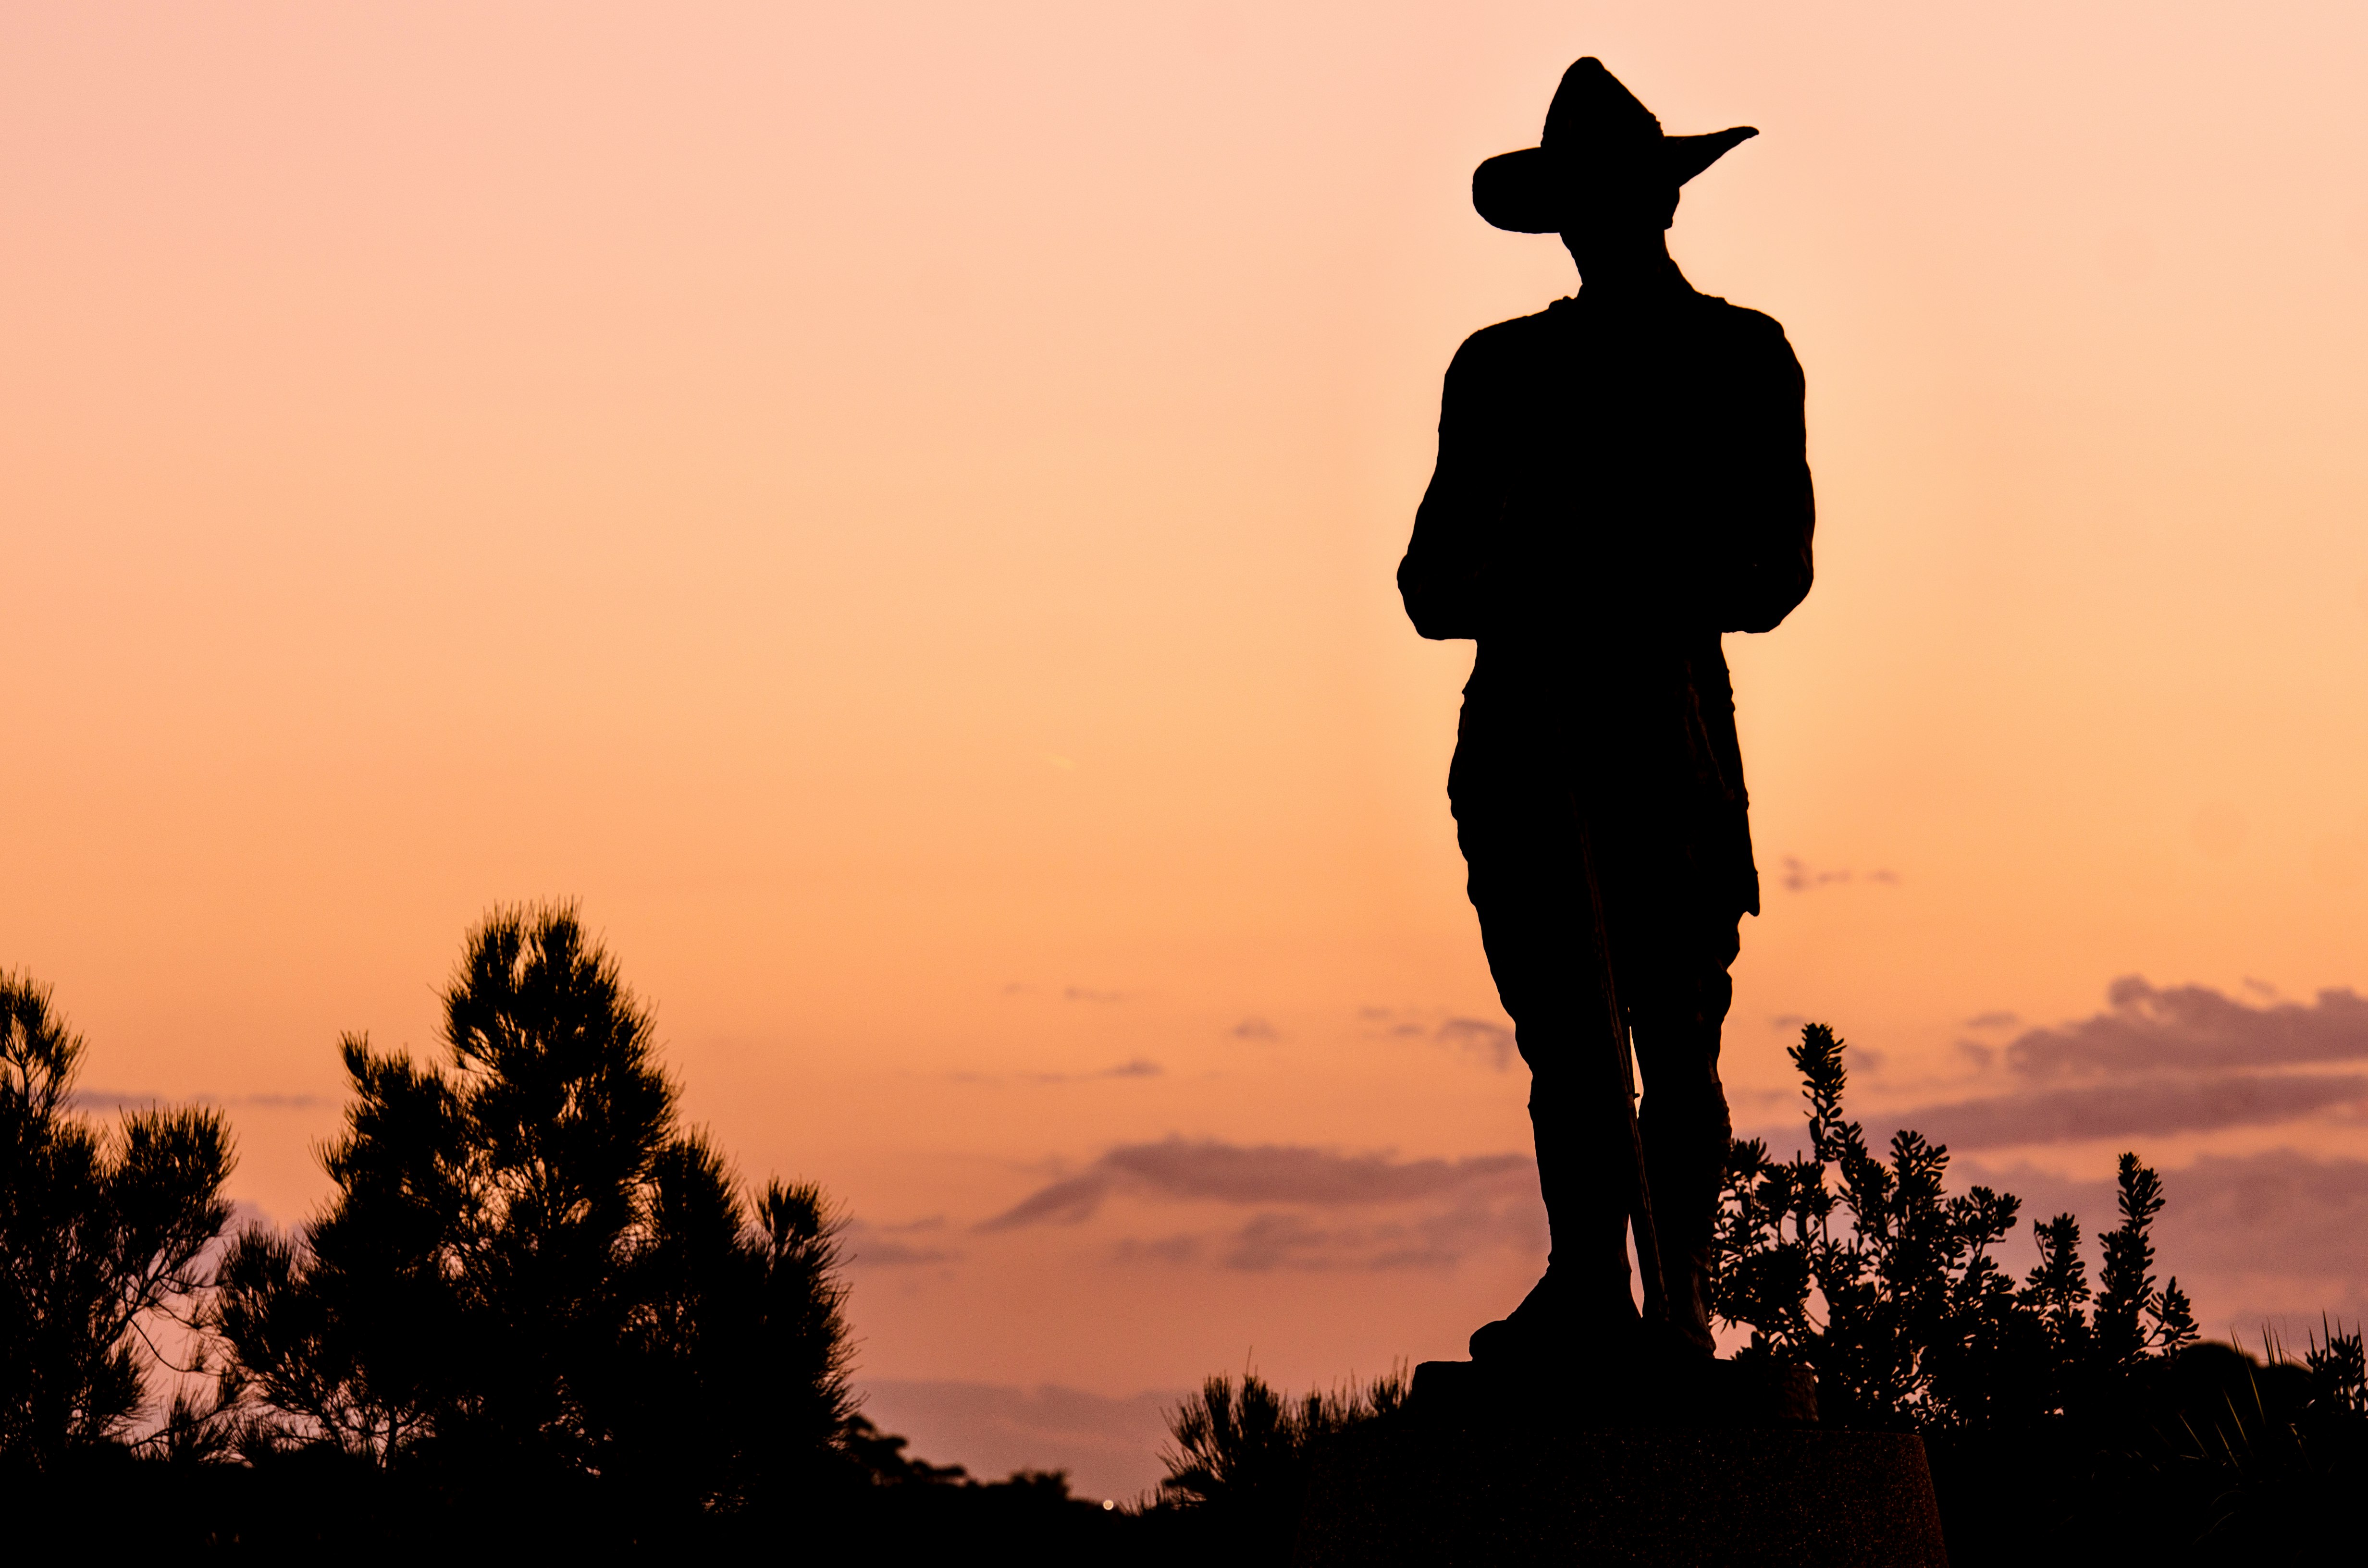 silhouette of person wearing hat